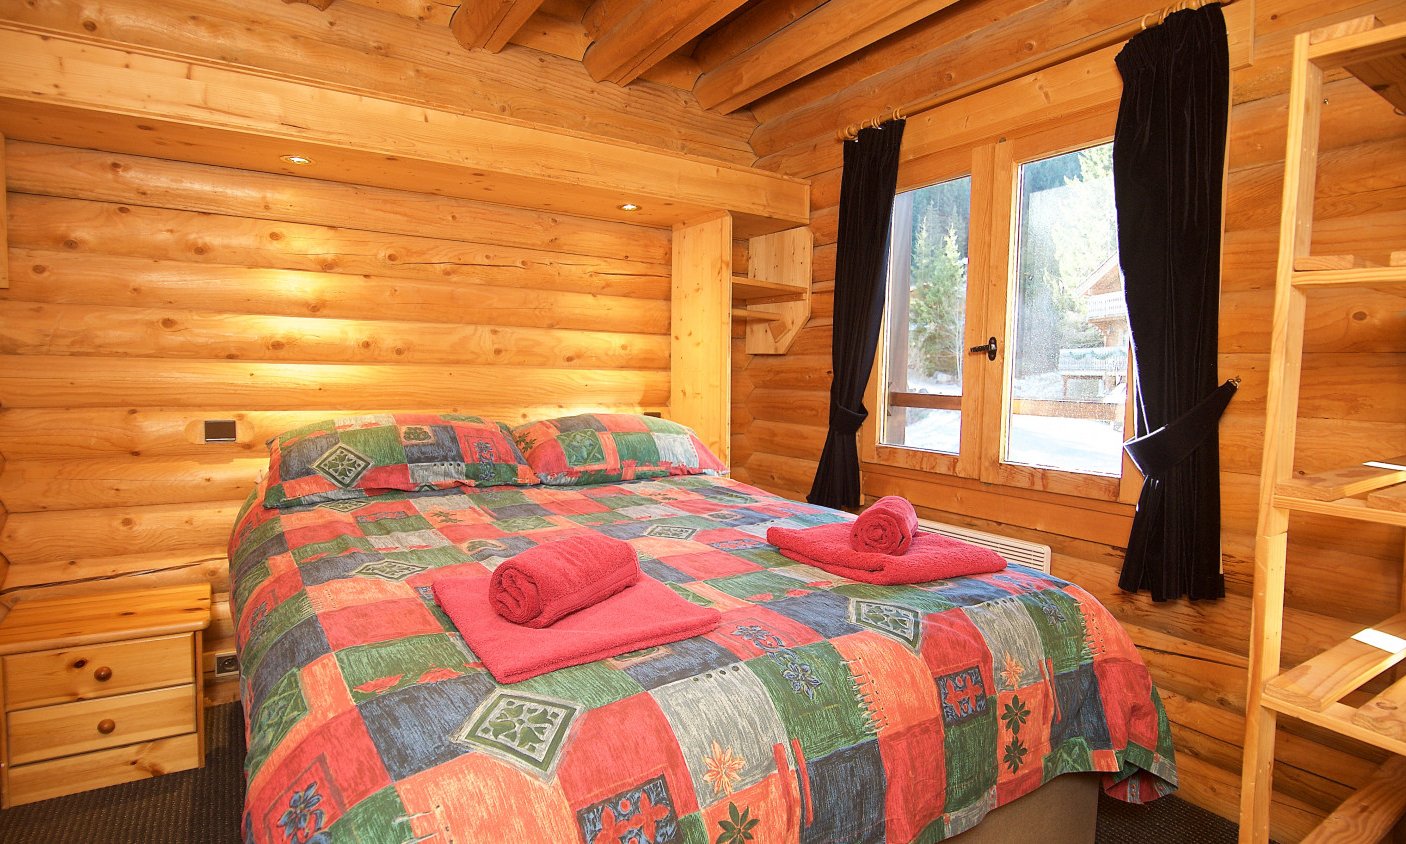 One of the Bedrooms in Chalet Christine La Tania